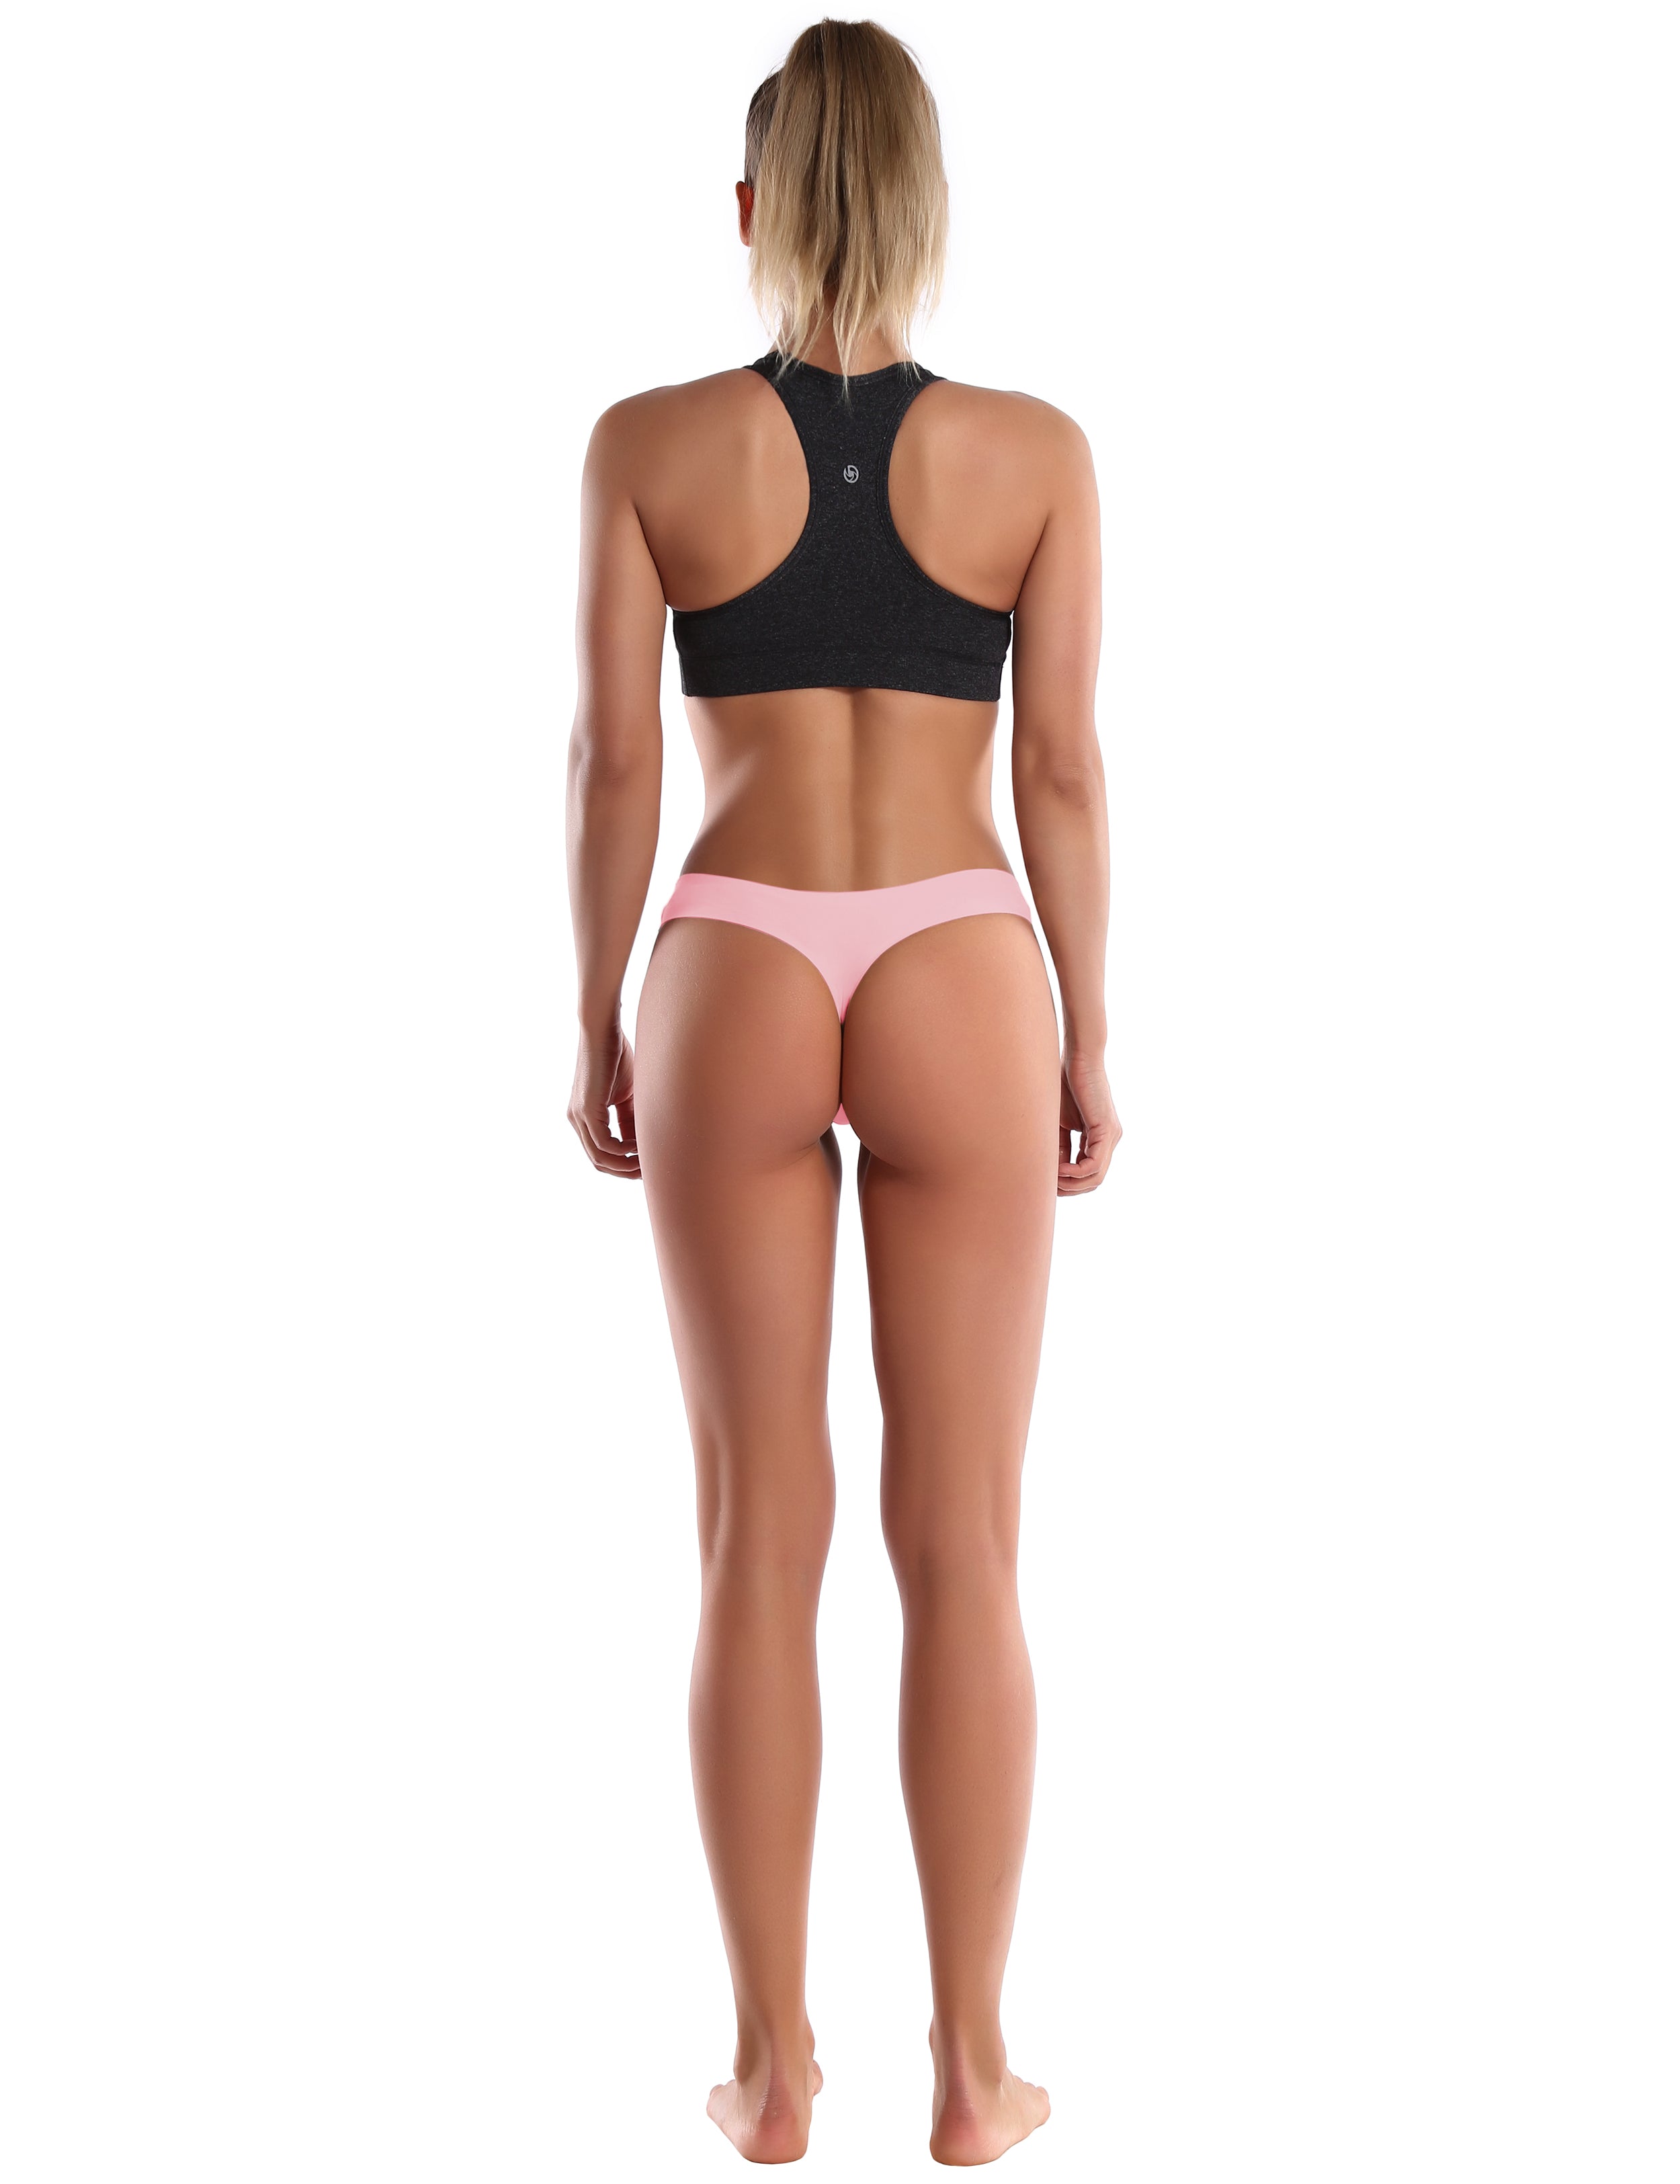 Invisibles Sport Thongs Indipink Sleek, soft, smooth and totally comfortable: our newest thongs style is here. High elasticity High density Softest-ever fabric Laser cutting Unsealed Comfortable No panty lines Machine wash 95% Nylon, 5% Spandex